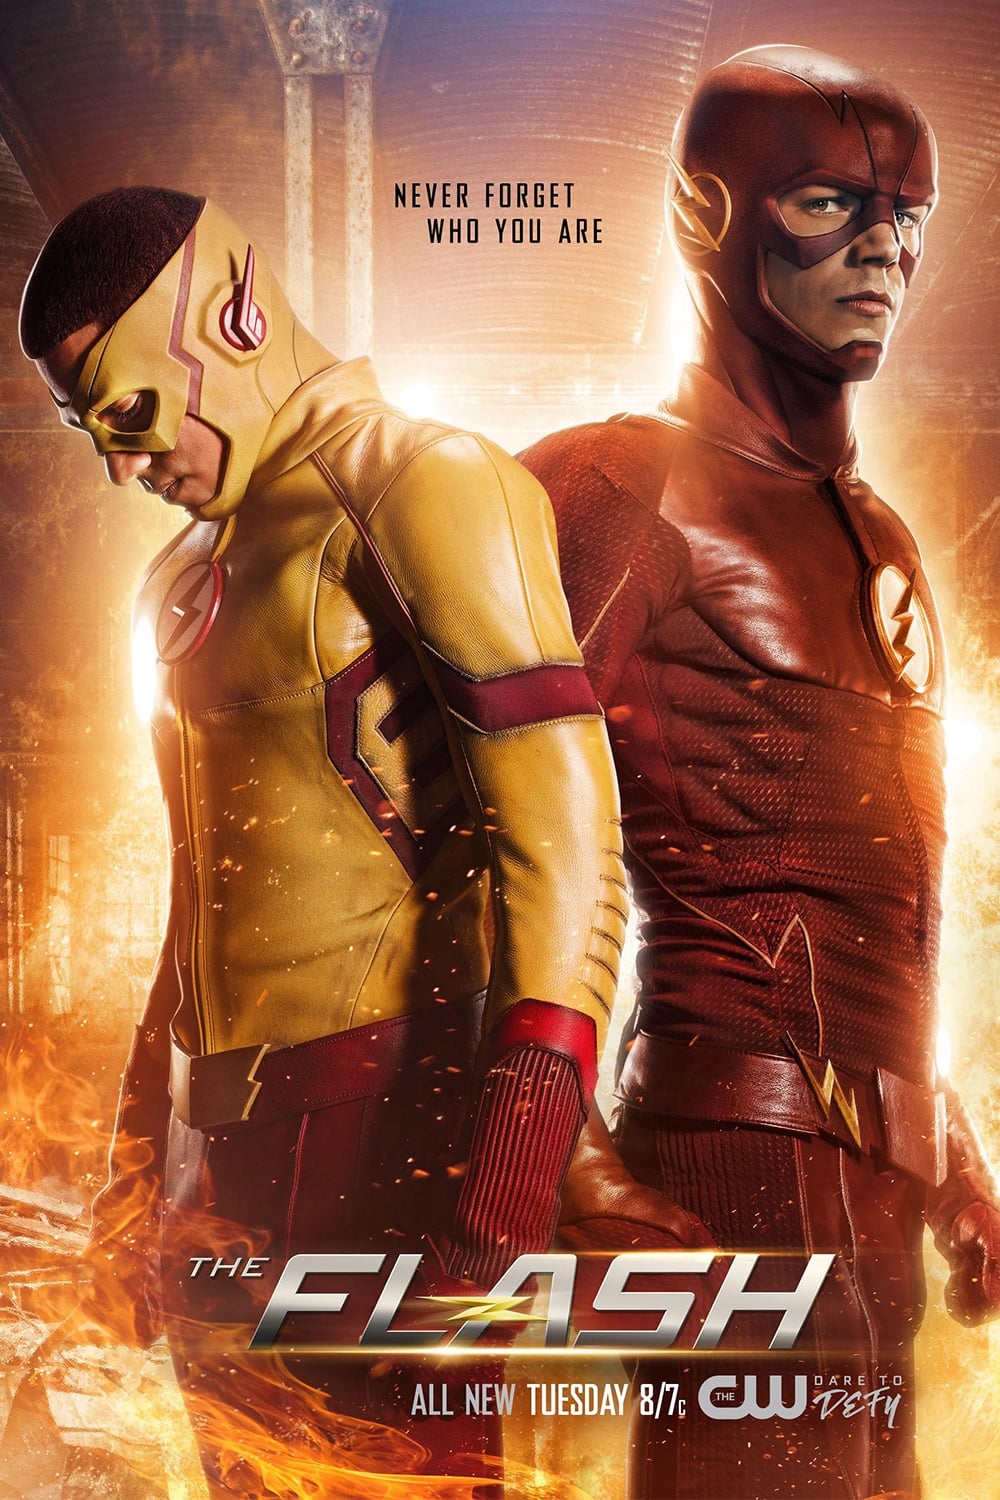 The Flash Reviews Movie Flash Movie Flashpoint Trailer Cast Date Release Time Plot Updates